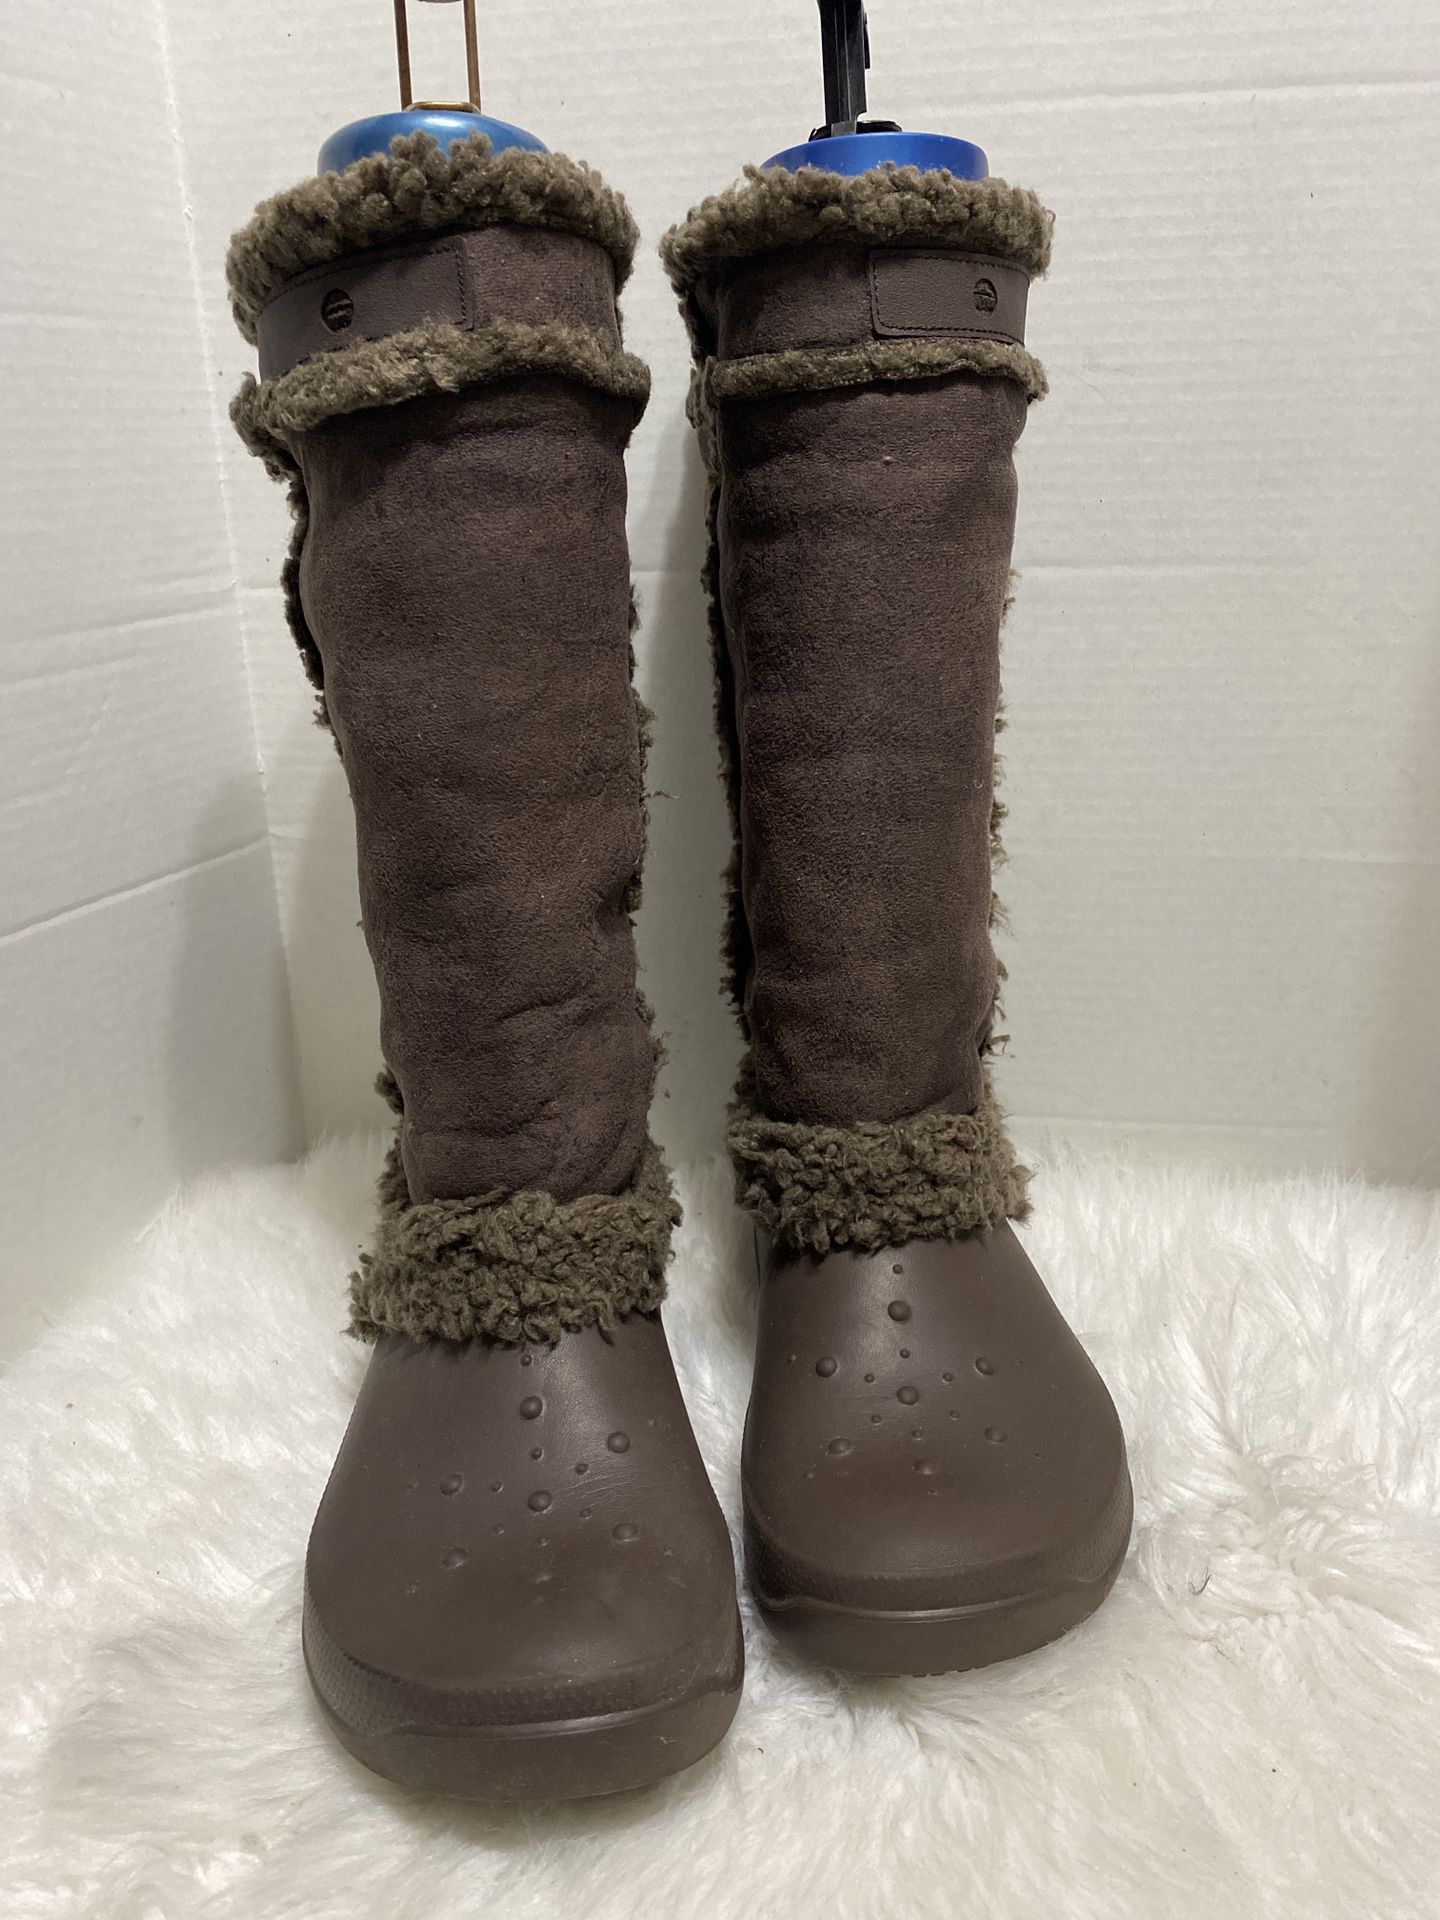 Crocs Nadia Brown  Faux Fur Lining Pull On Winter Boots Women's Size 9 